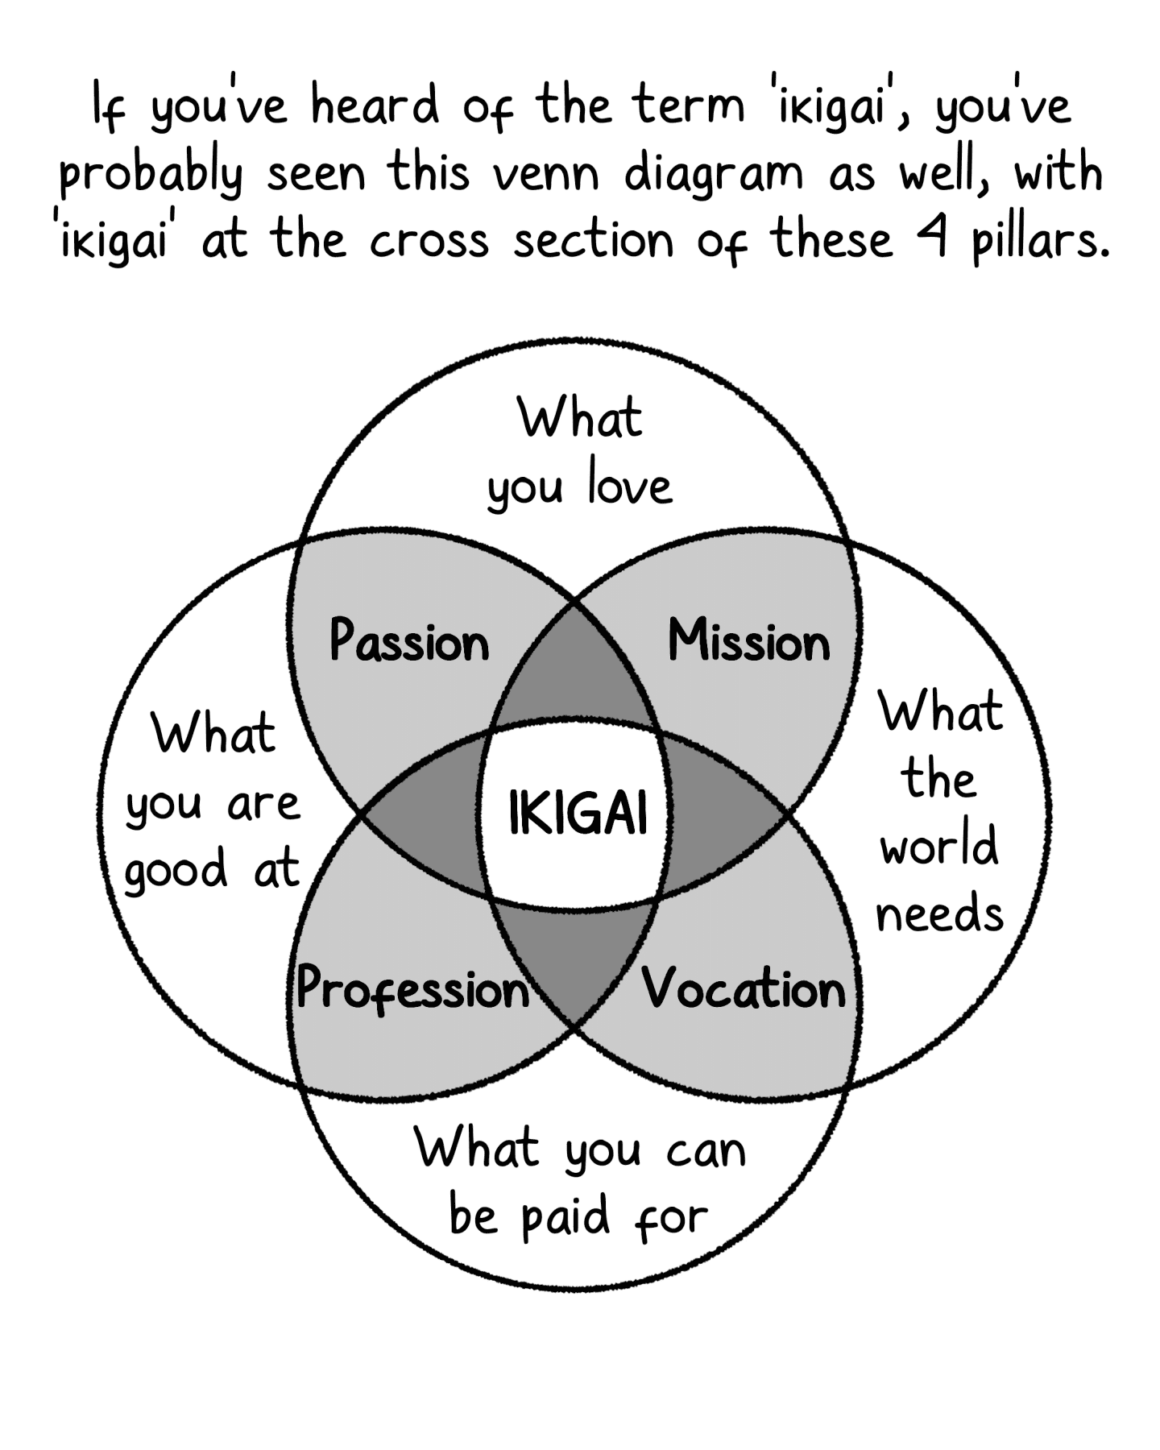 Ikigai - The Reason For Being